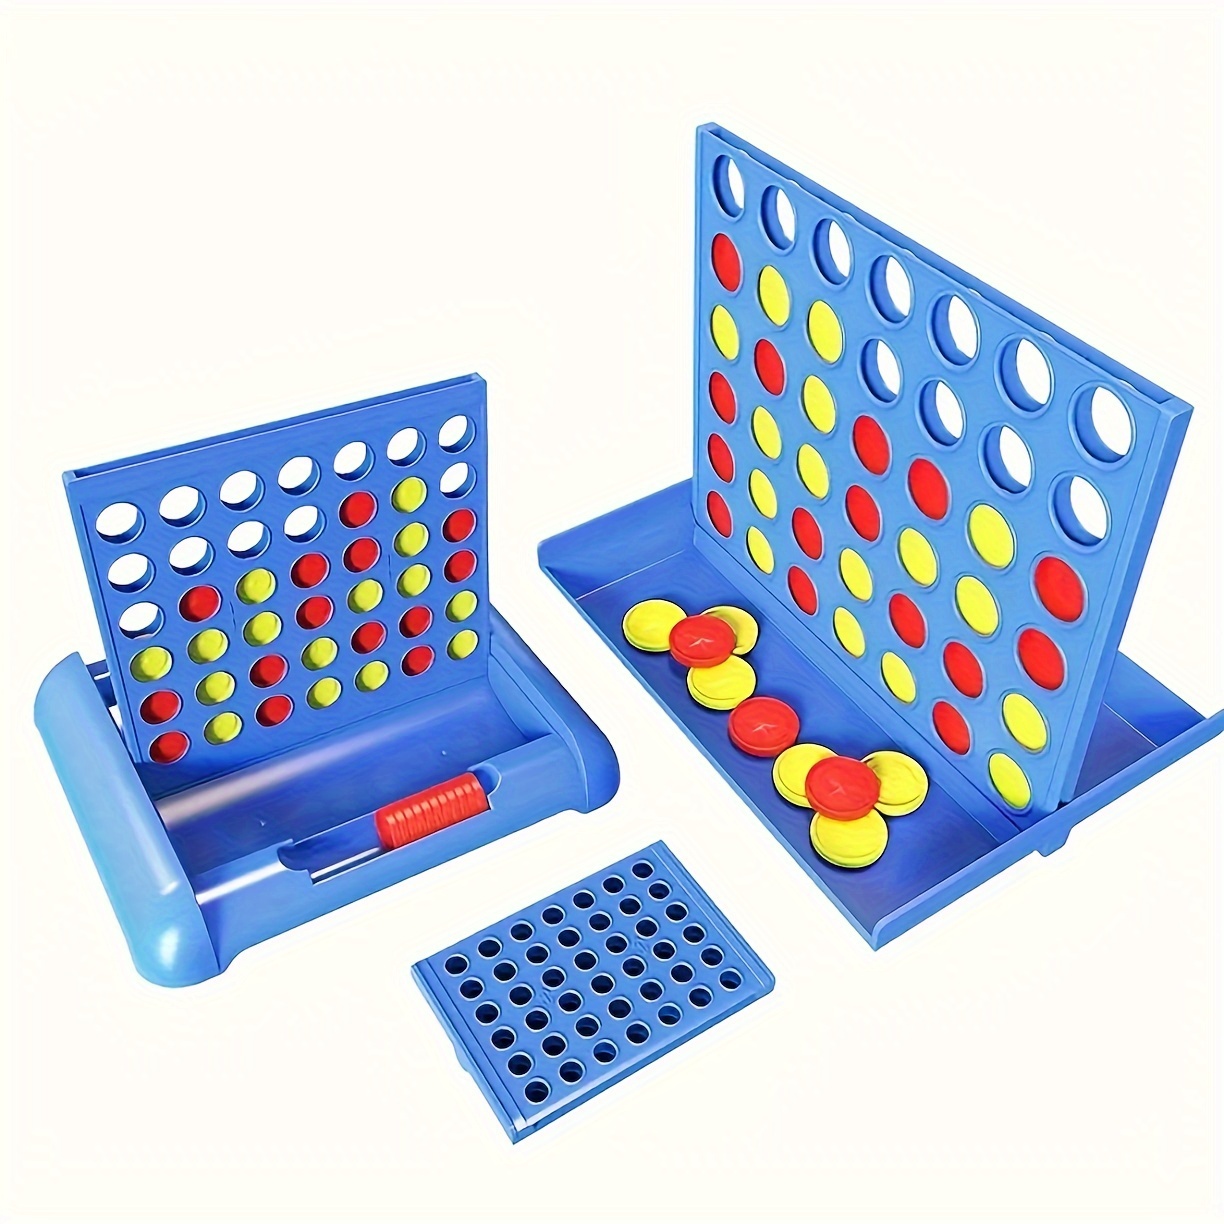 

A Three-dimensional Connect 4 Game Bingo Game, A Puzzle Board Game For Education